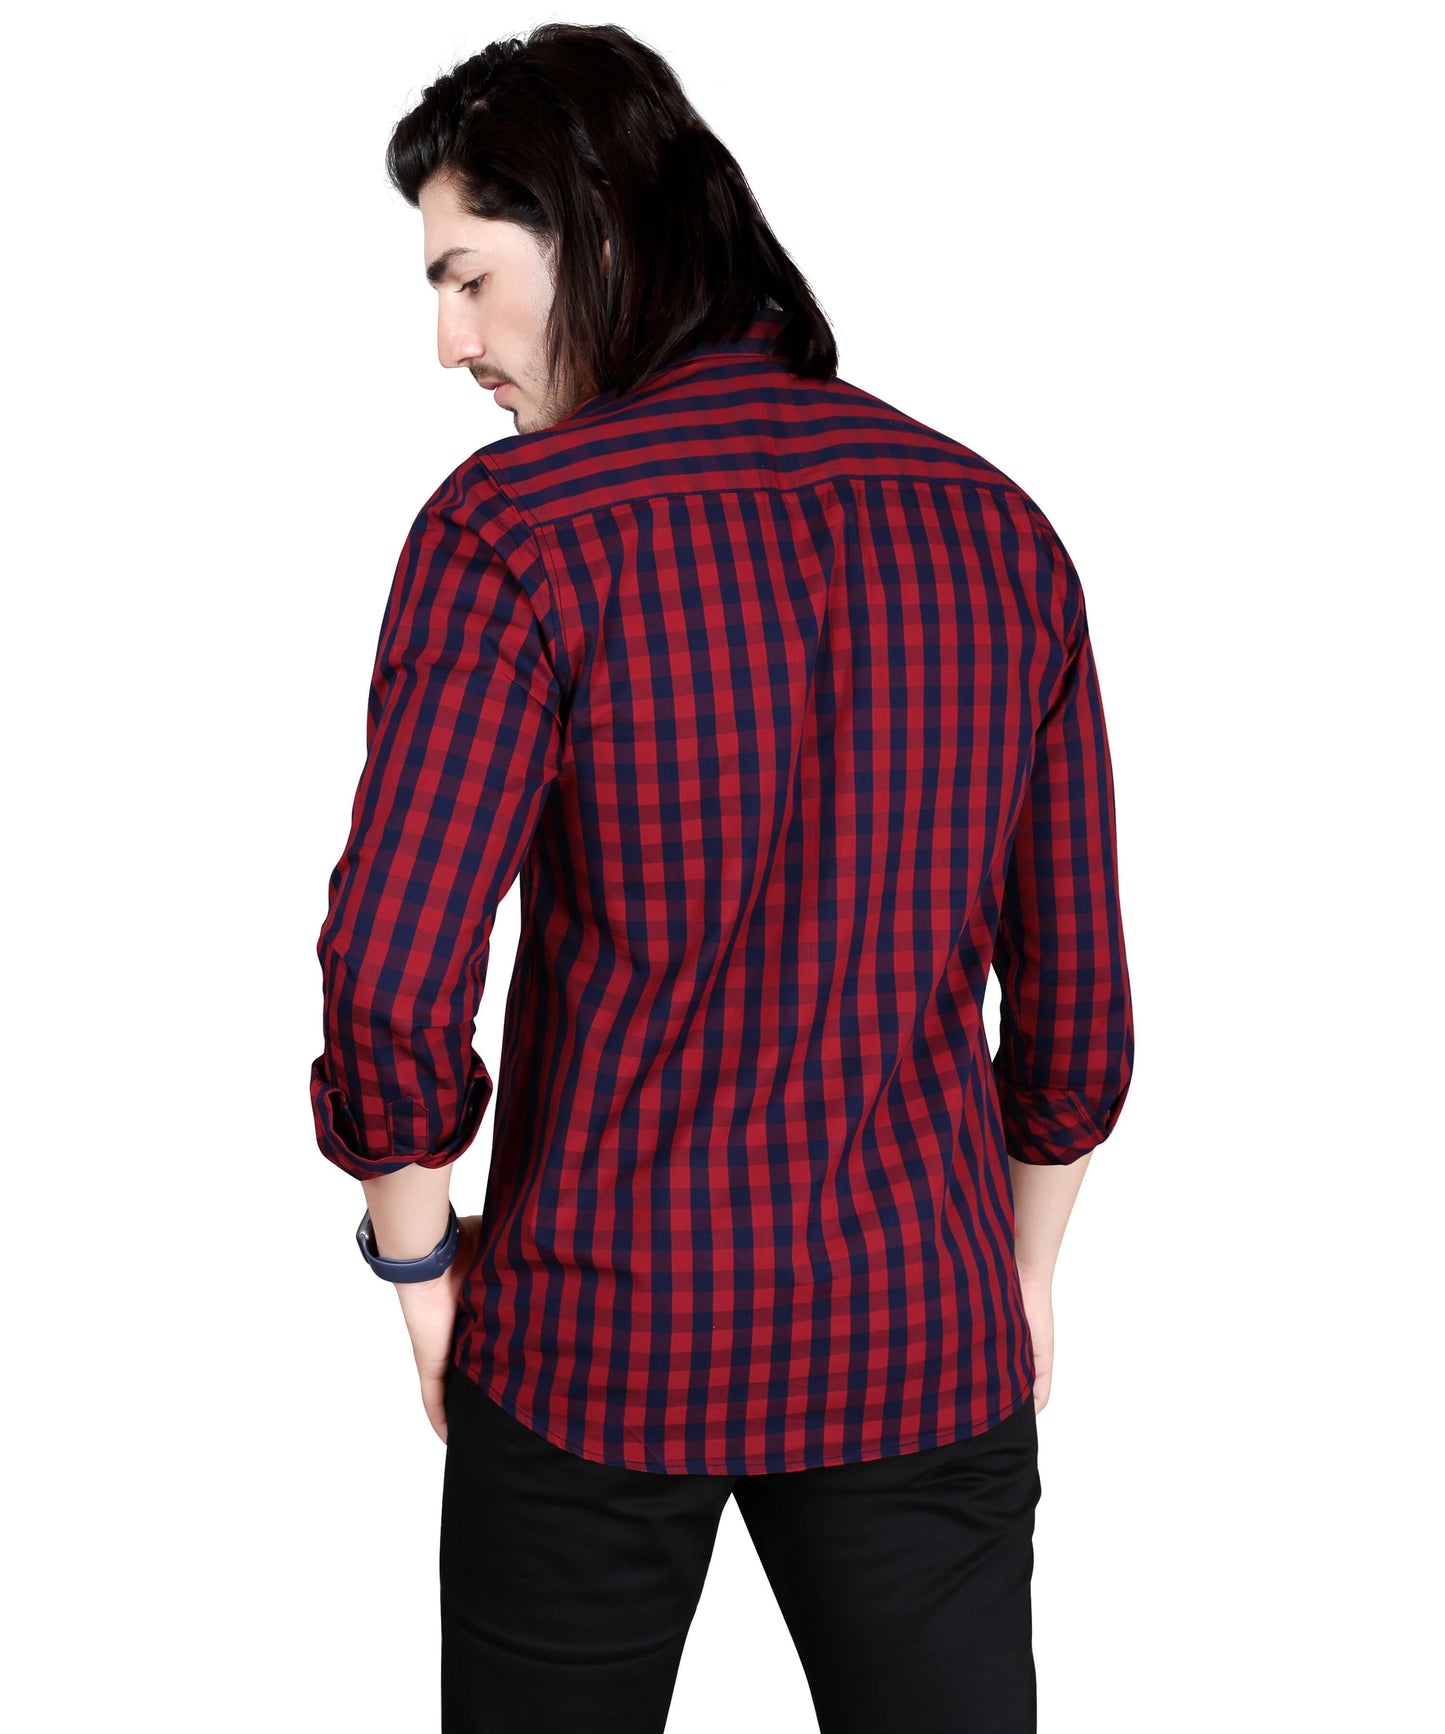 5thanfold Men's Casual Pure Cotton Full Sleeve Checkered Red Slim Fit Shirt